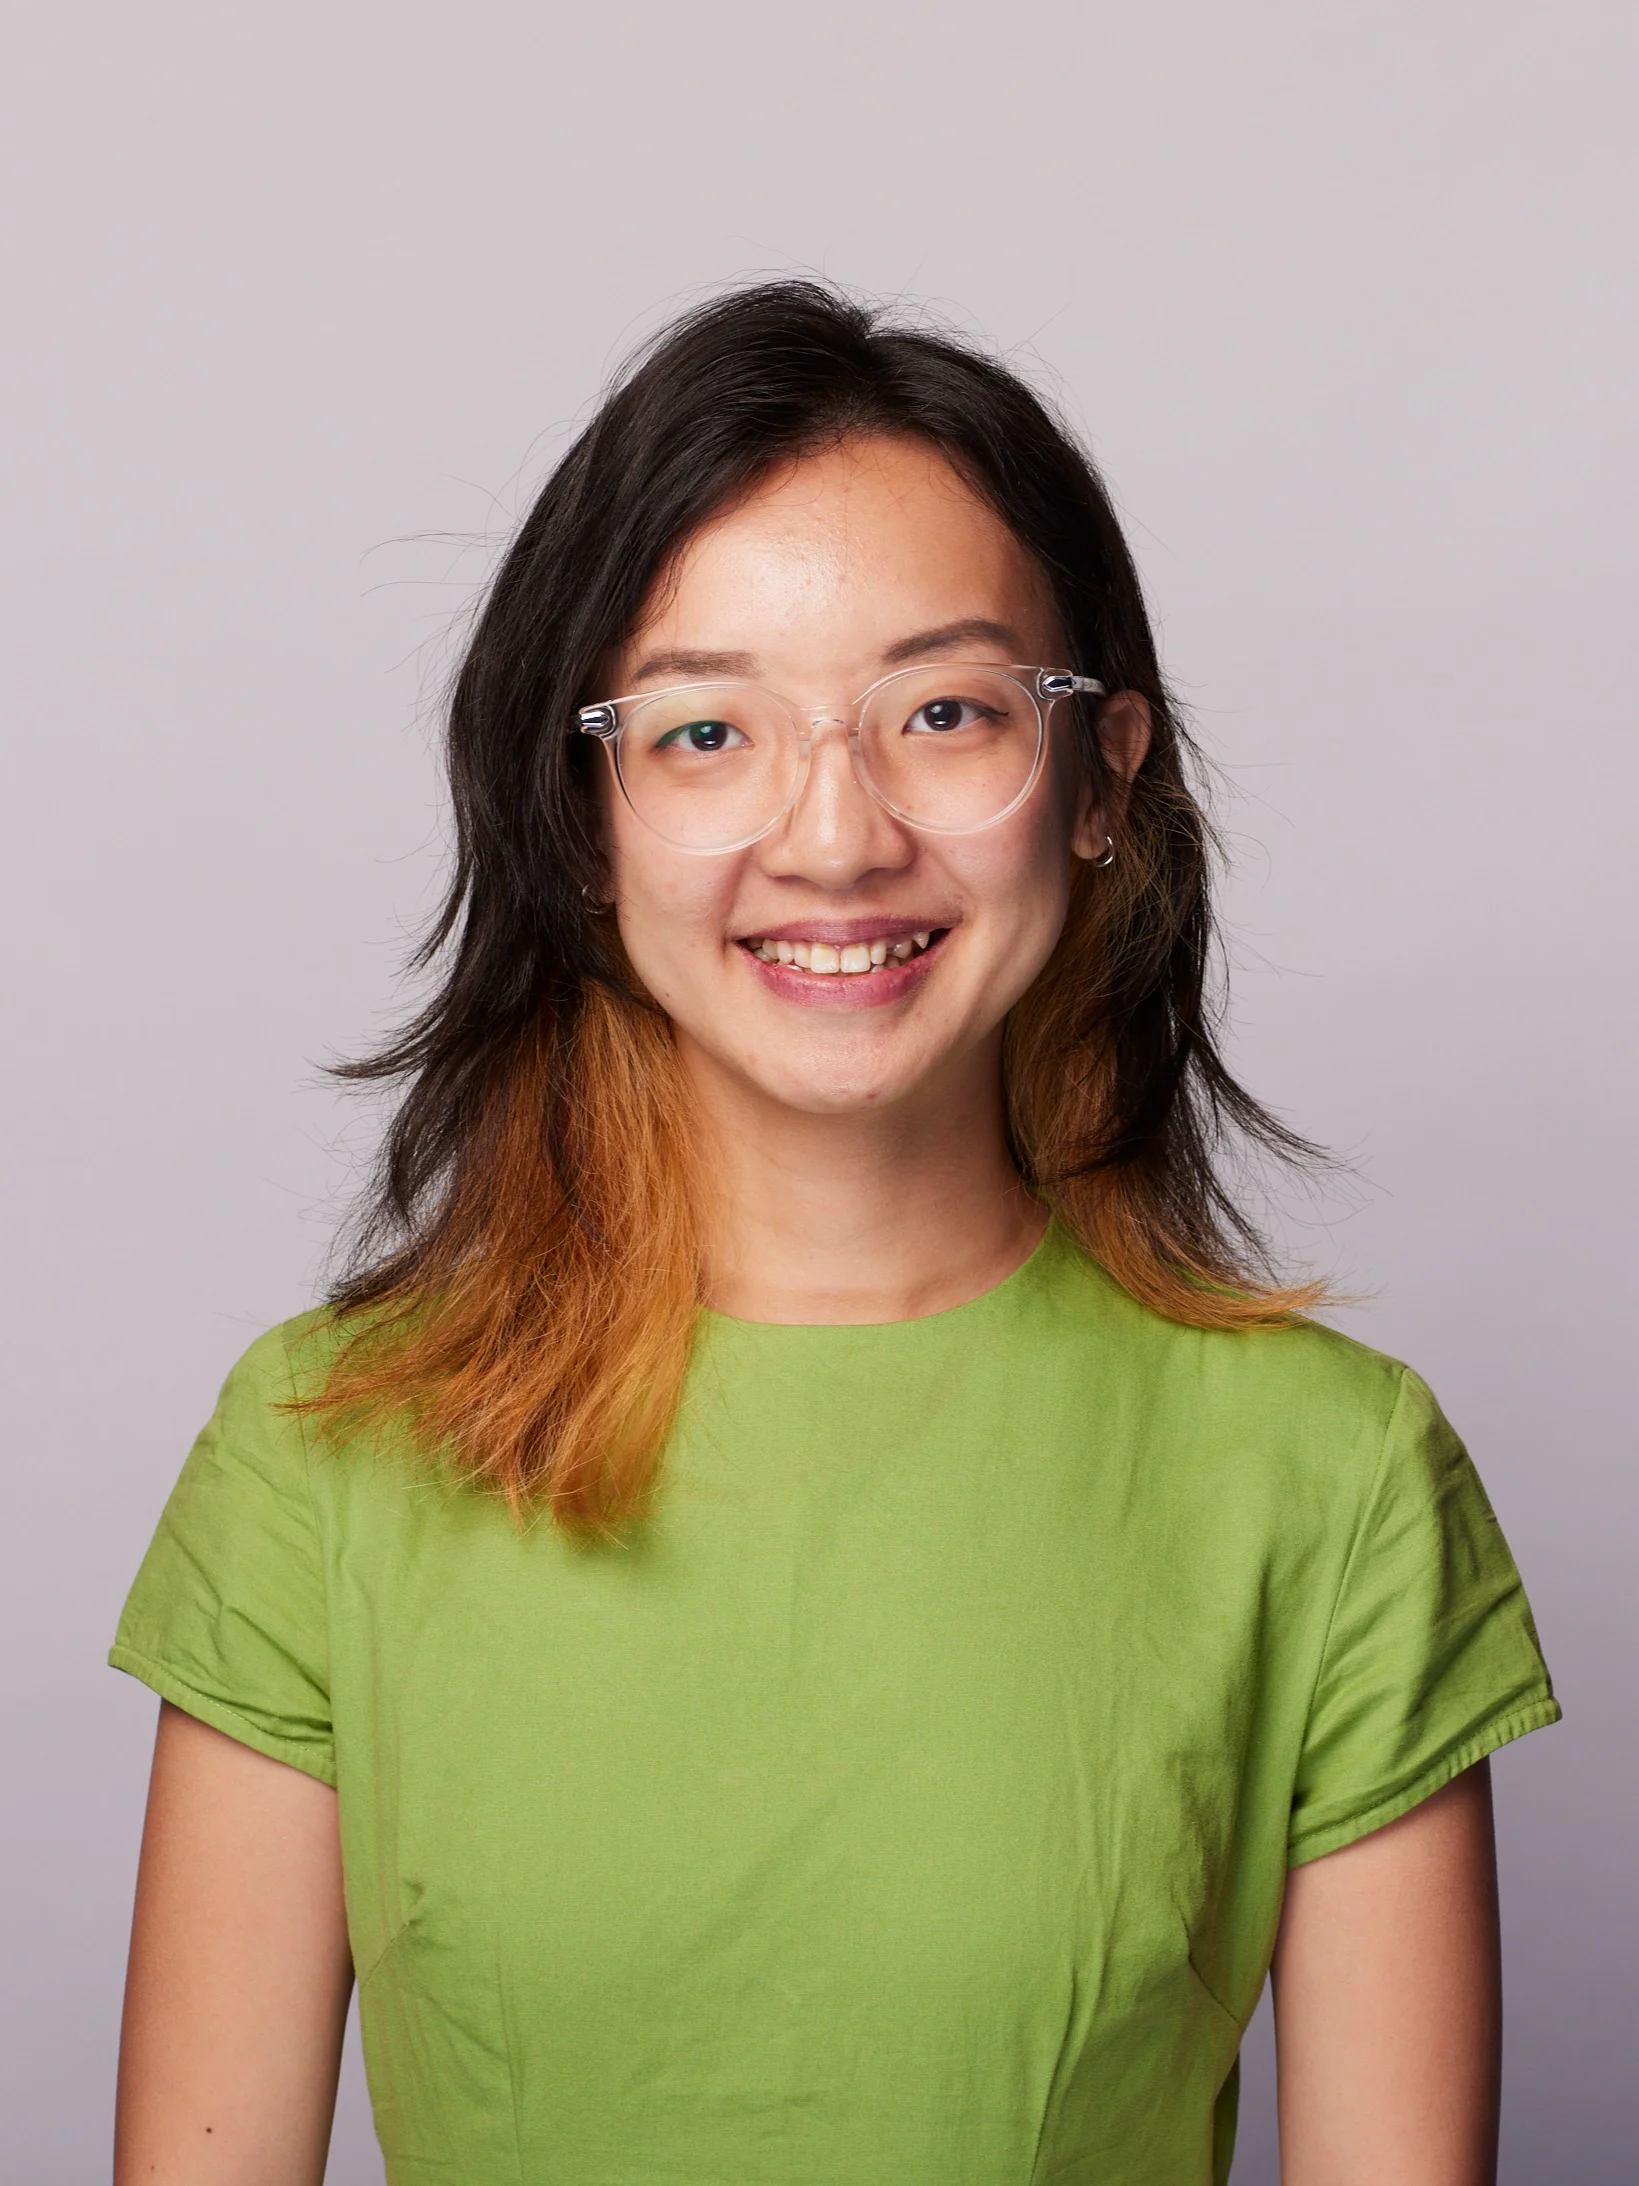 Meet Qiyun Woo, an environmentalist and content creator, is passionate about making climate science more accessible and less scary.